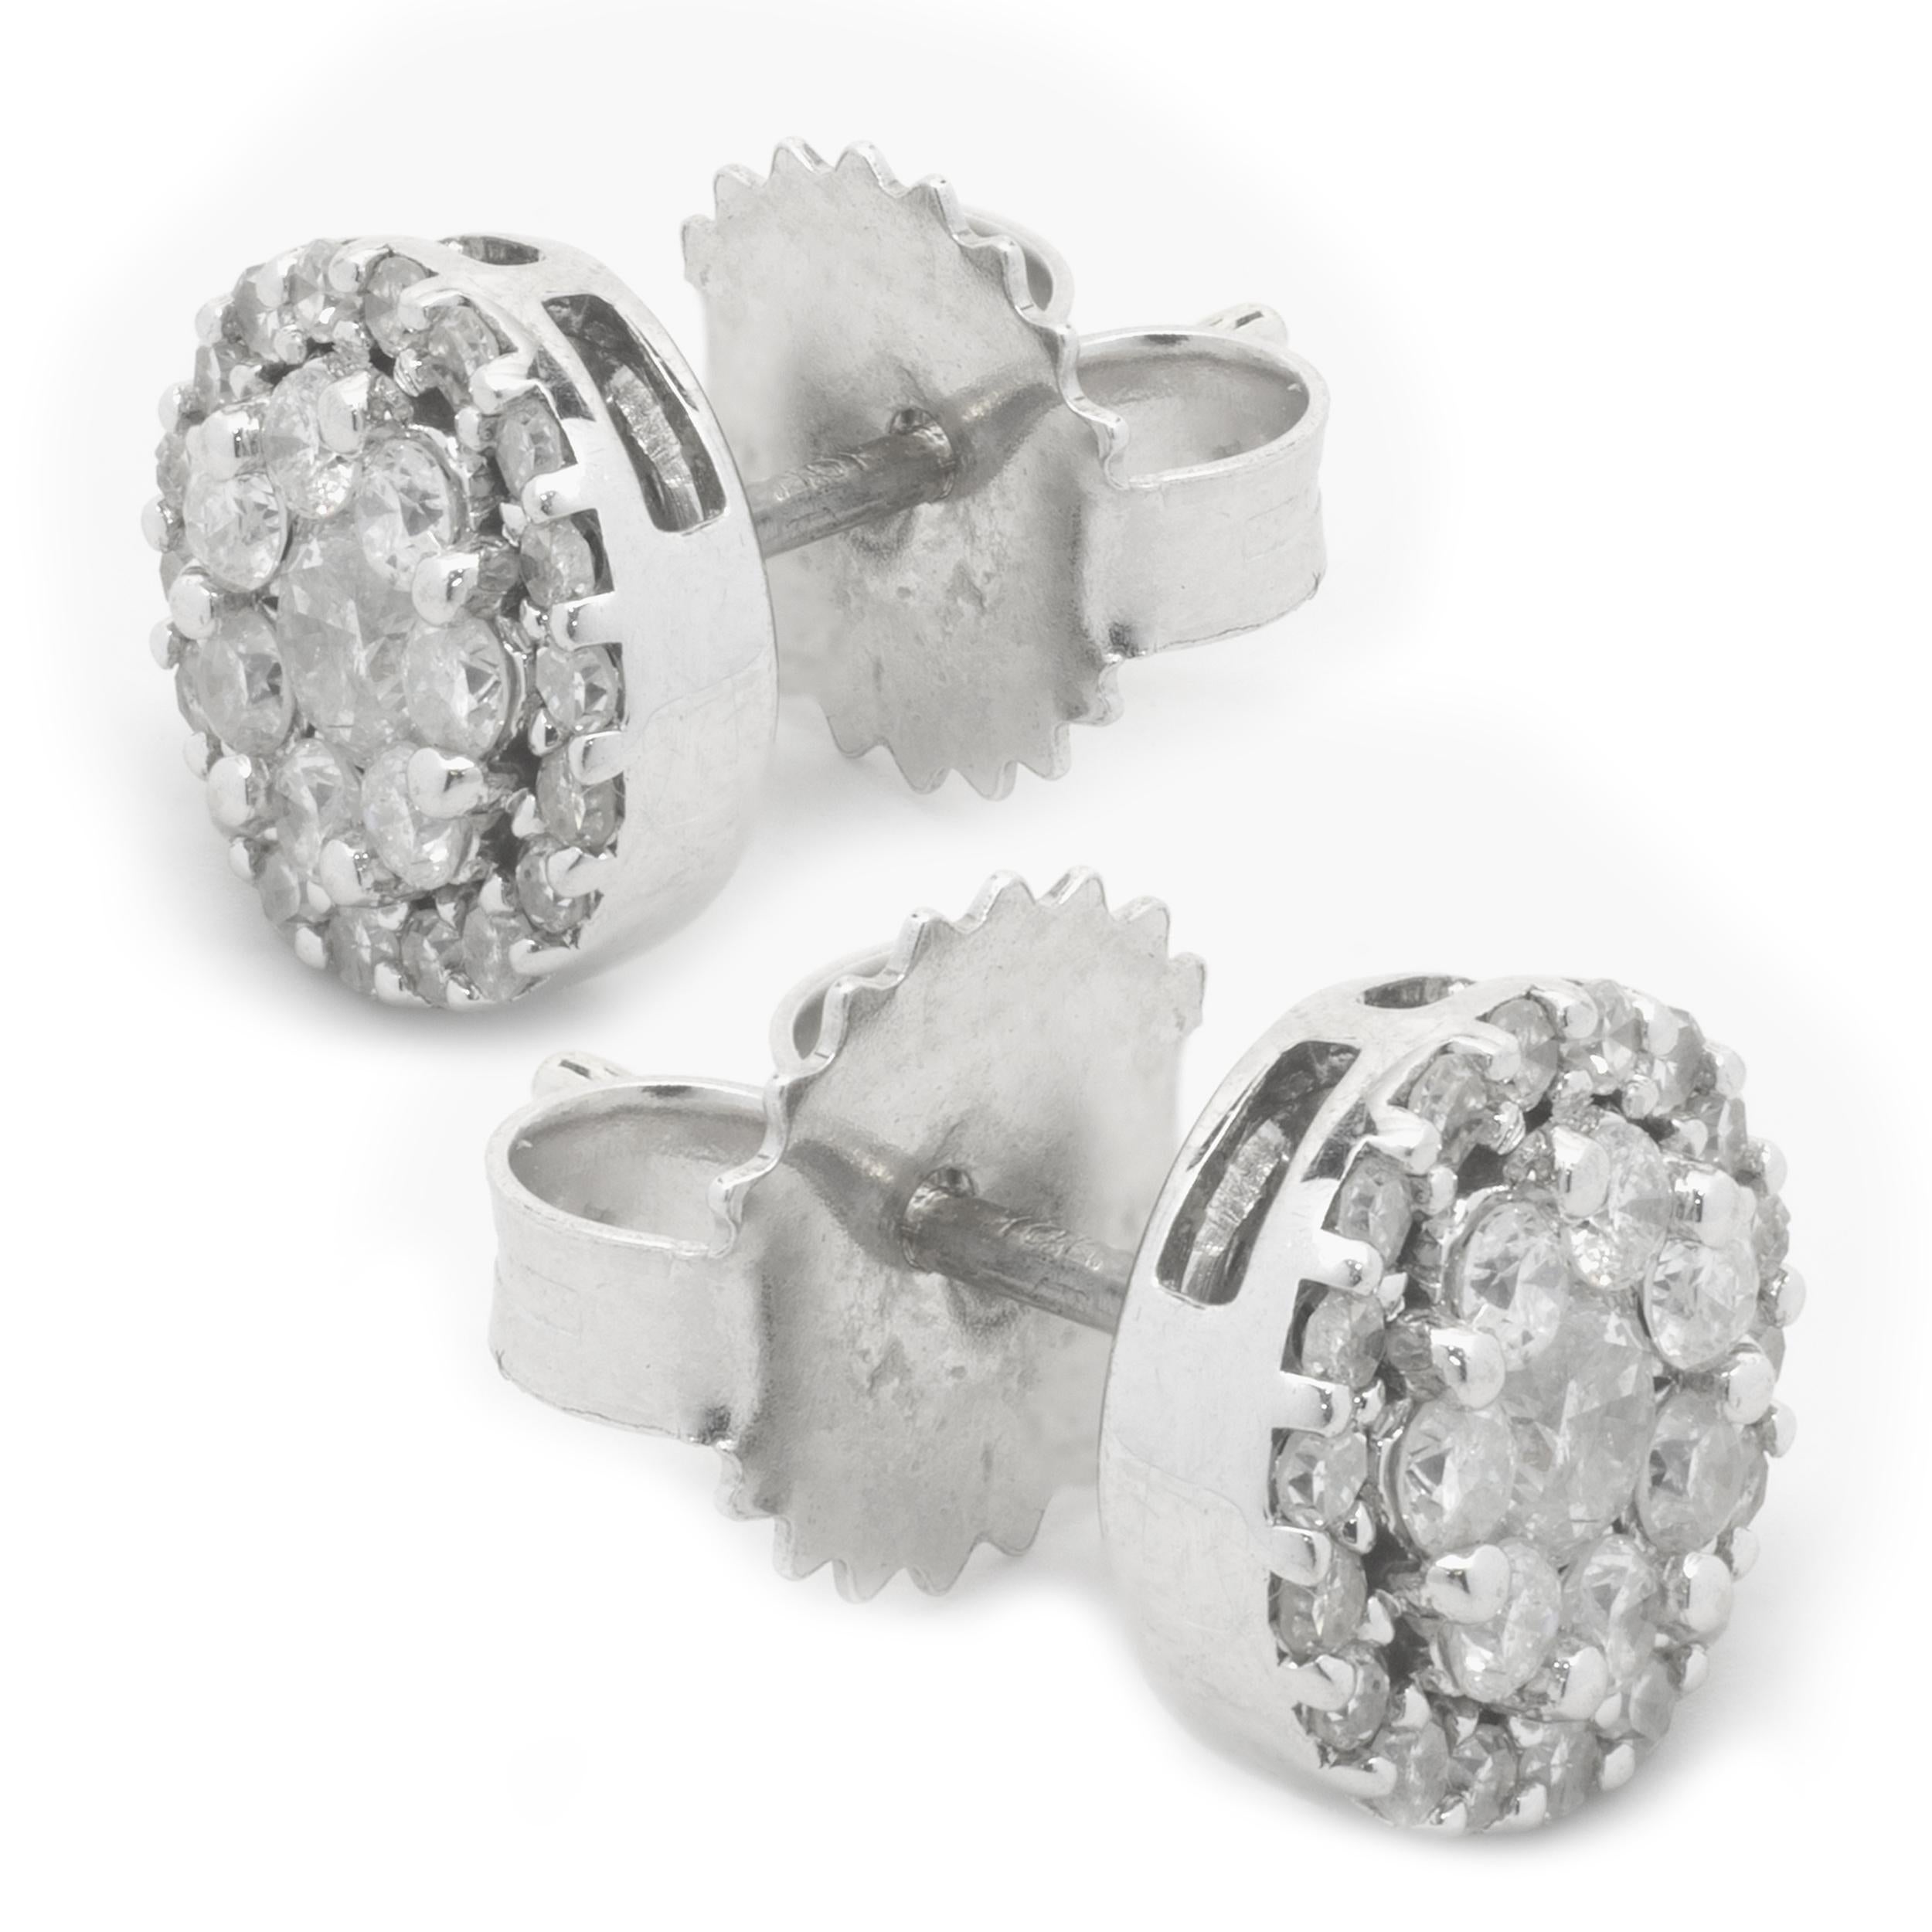 Designer: custom design
Material: 14K white gold
Diamonds: 26 round cut = 1.00cttw
Color: G
Clarity: SI2
Dimensions: earrings measure 7.50mm
Fastenings: post with friction backs
Weight: 1.72 grams
